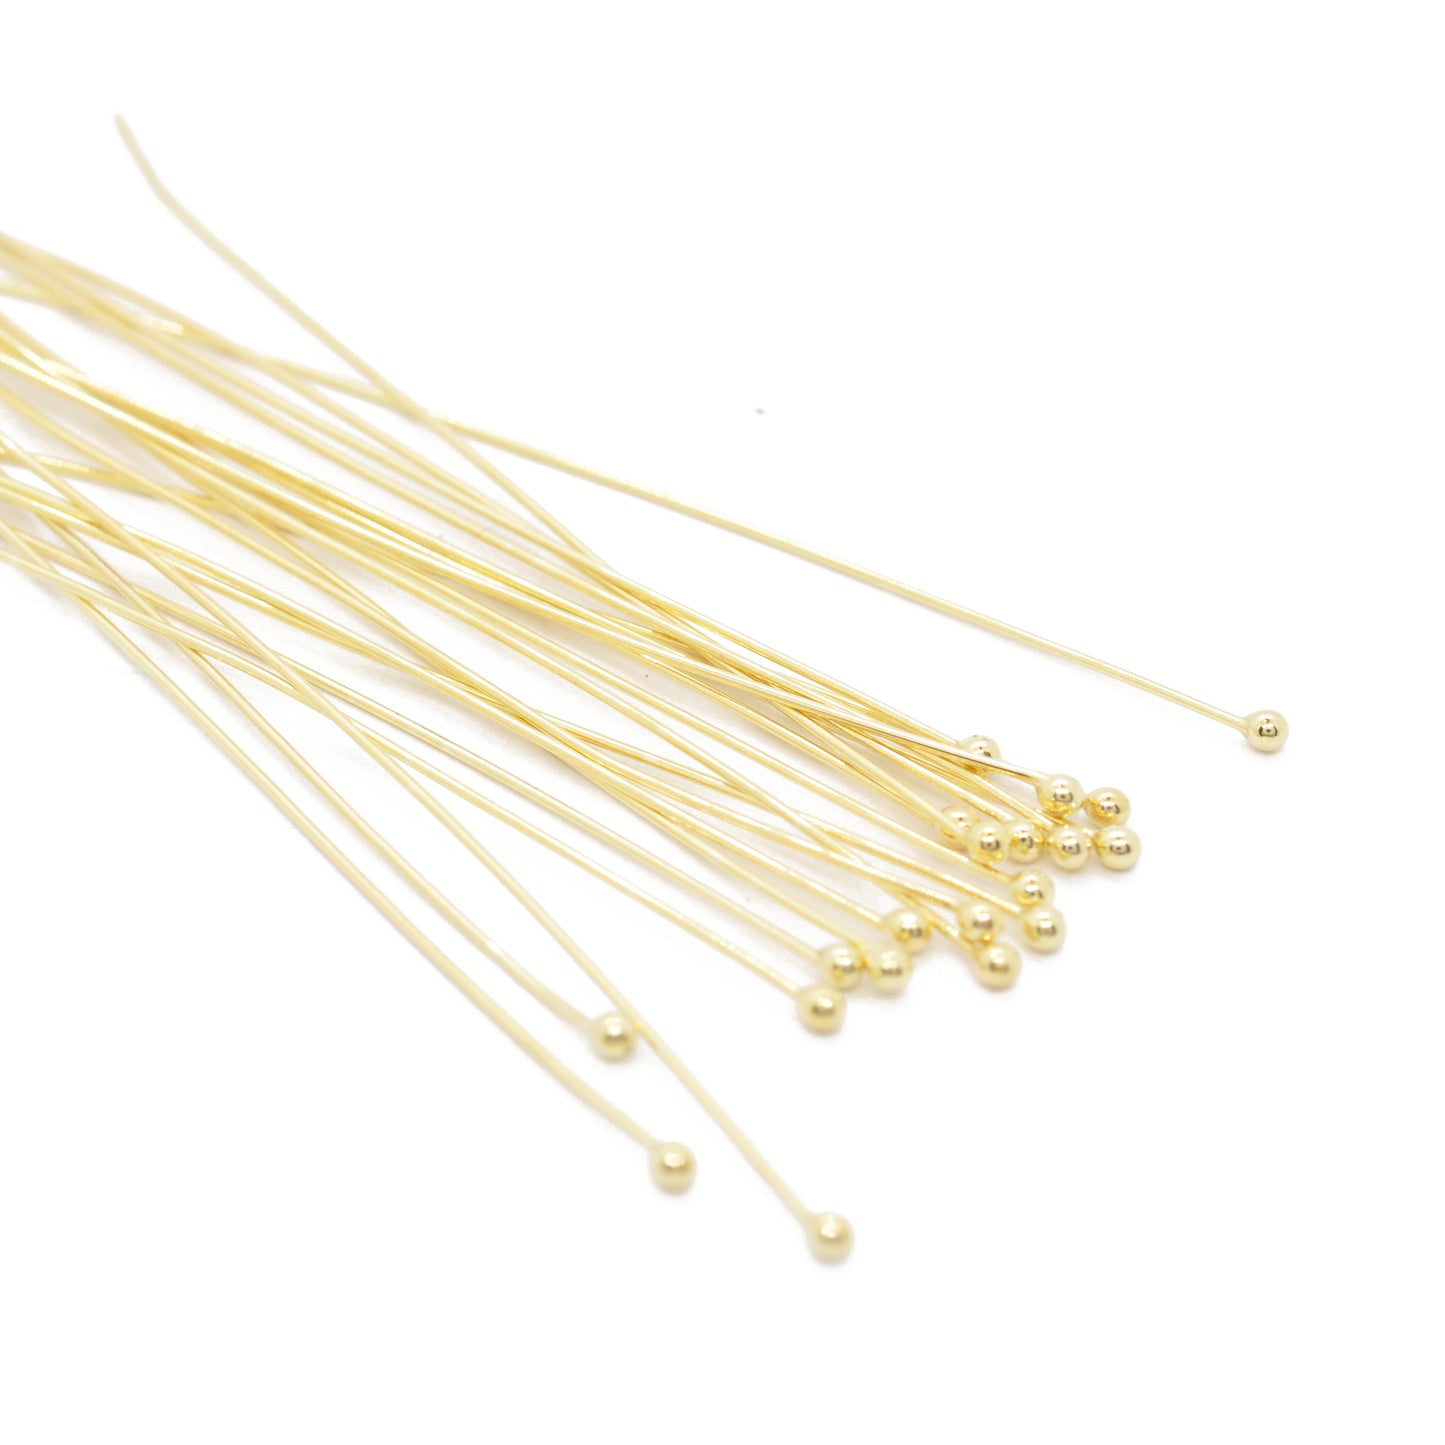 Headpin long / 925 silver gold plated / 70mm